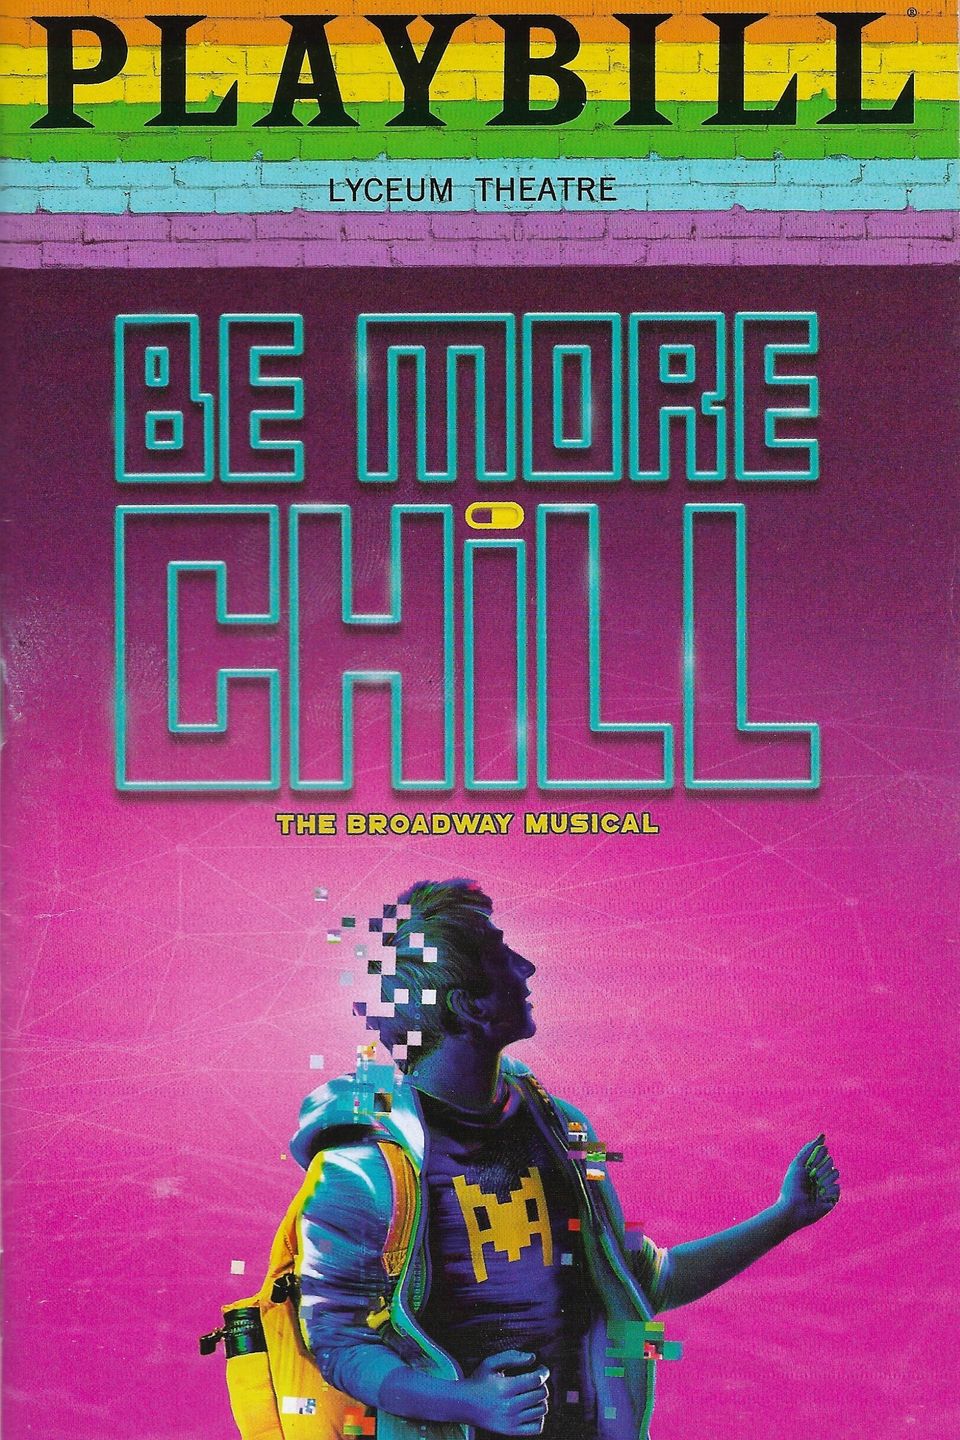 Be more chill